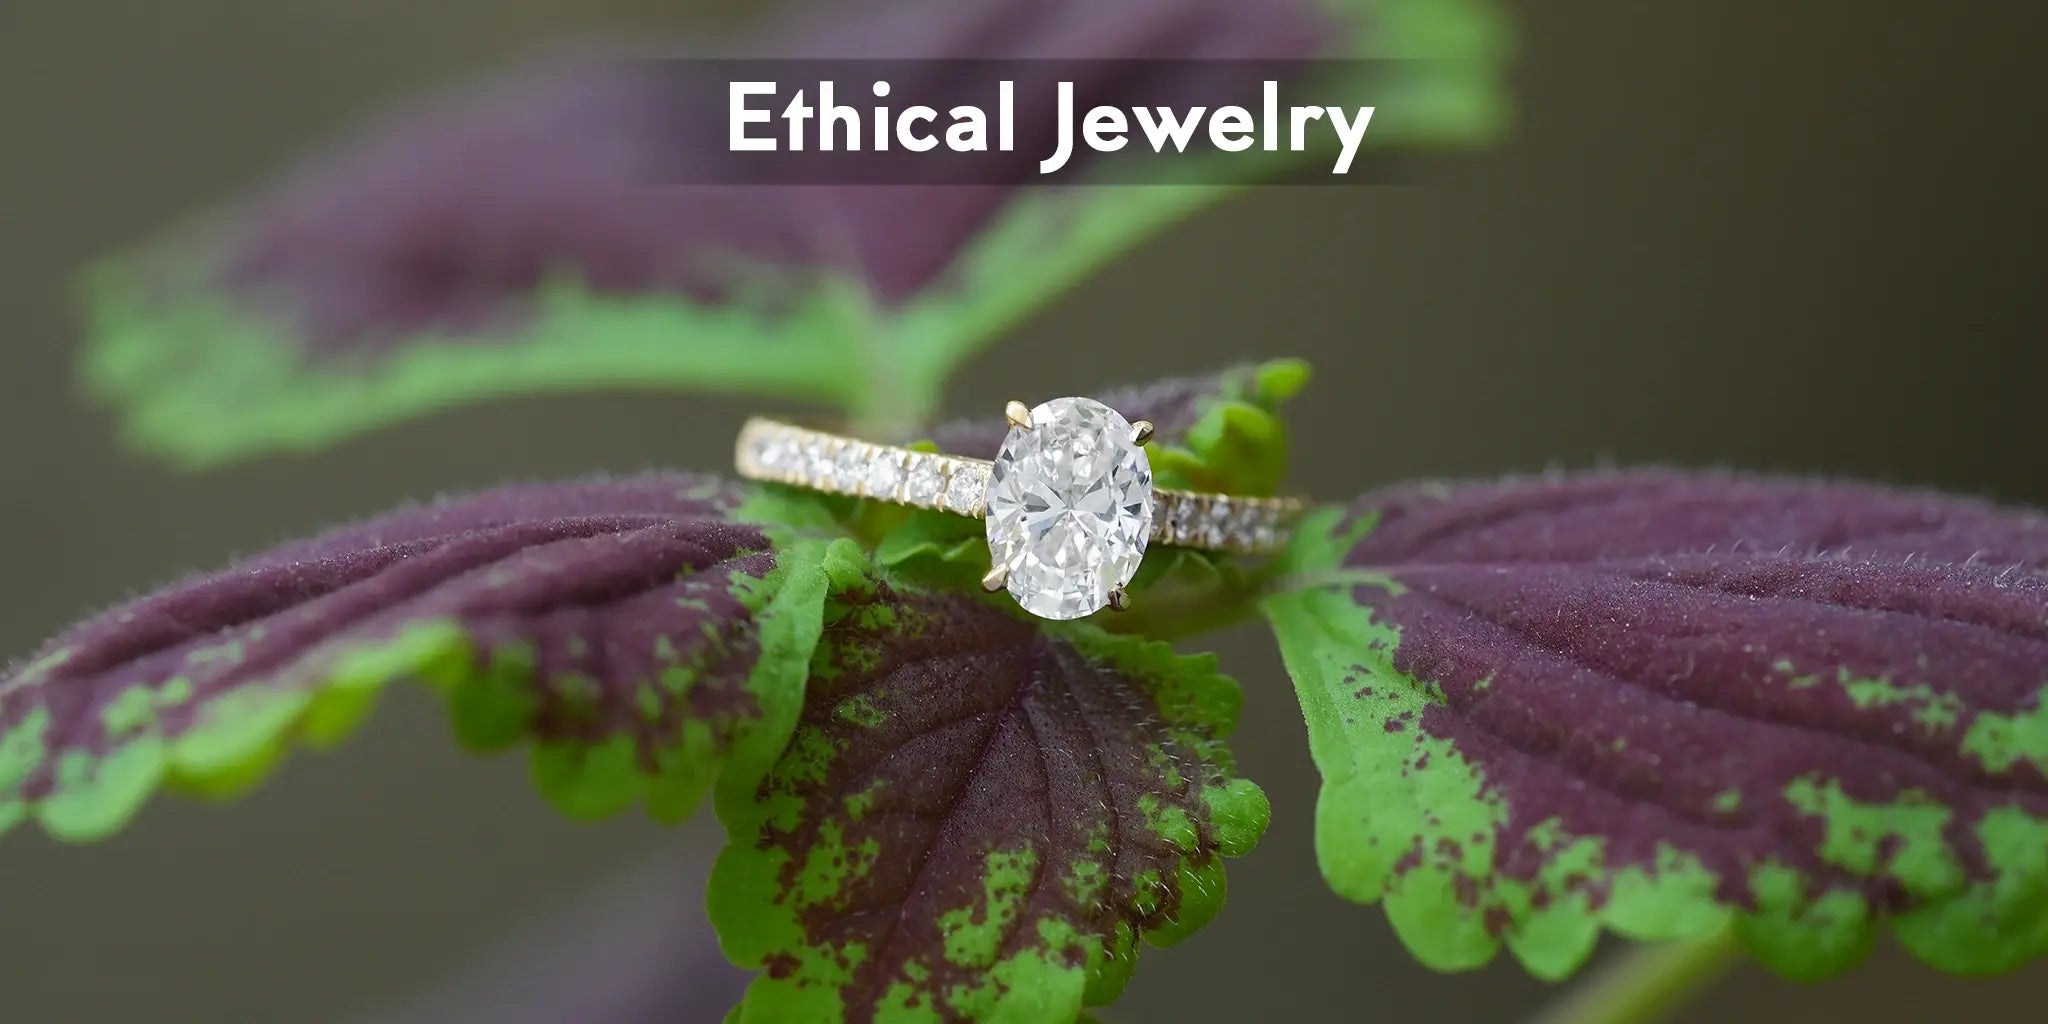 Ethical oval diamond ring jewelry appearance